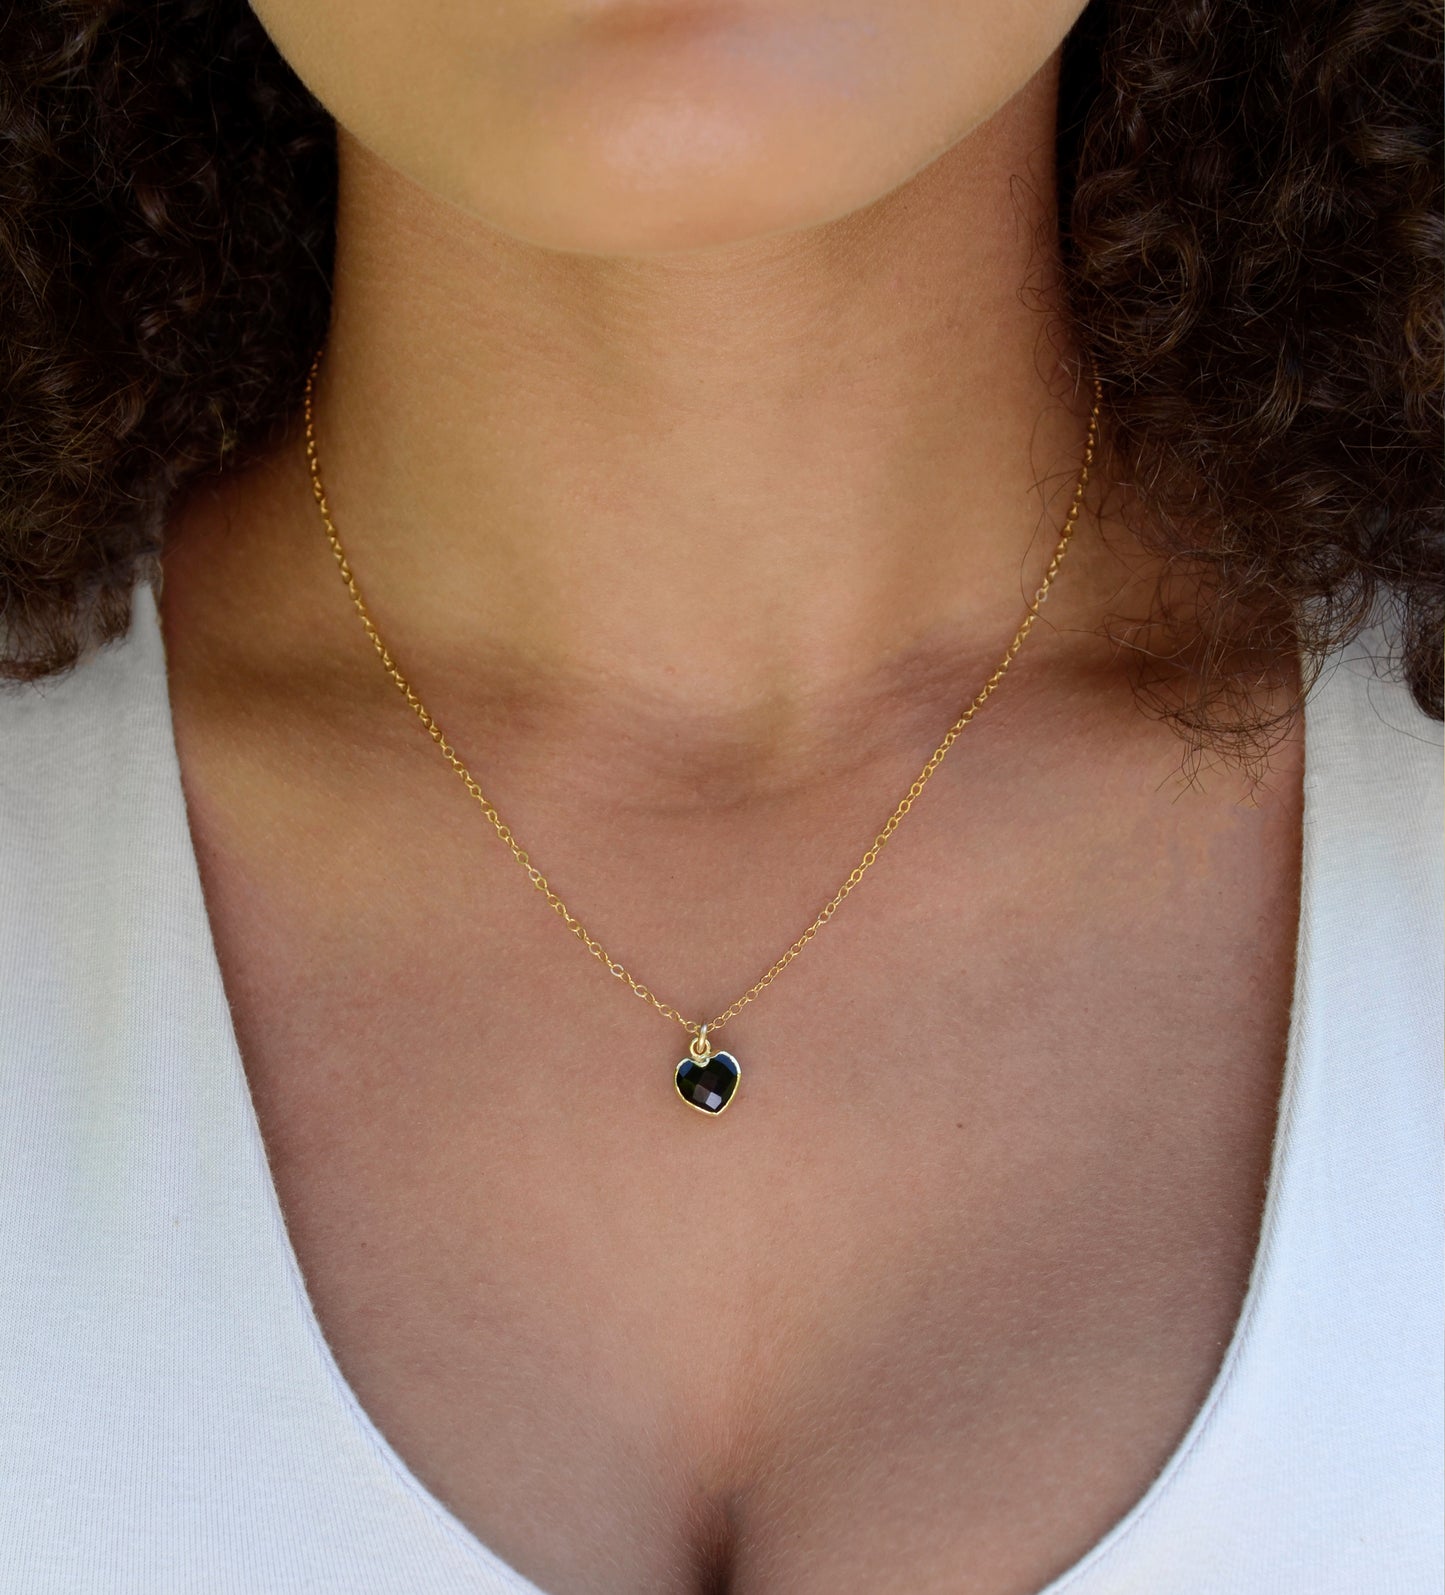 Black Onyx gold heart necklace. A black stone heart bezeled in gold is suspended from a 14k gold filled chain. Modeled image.